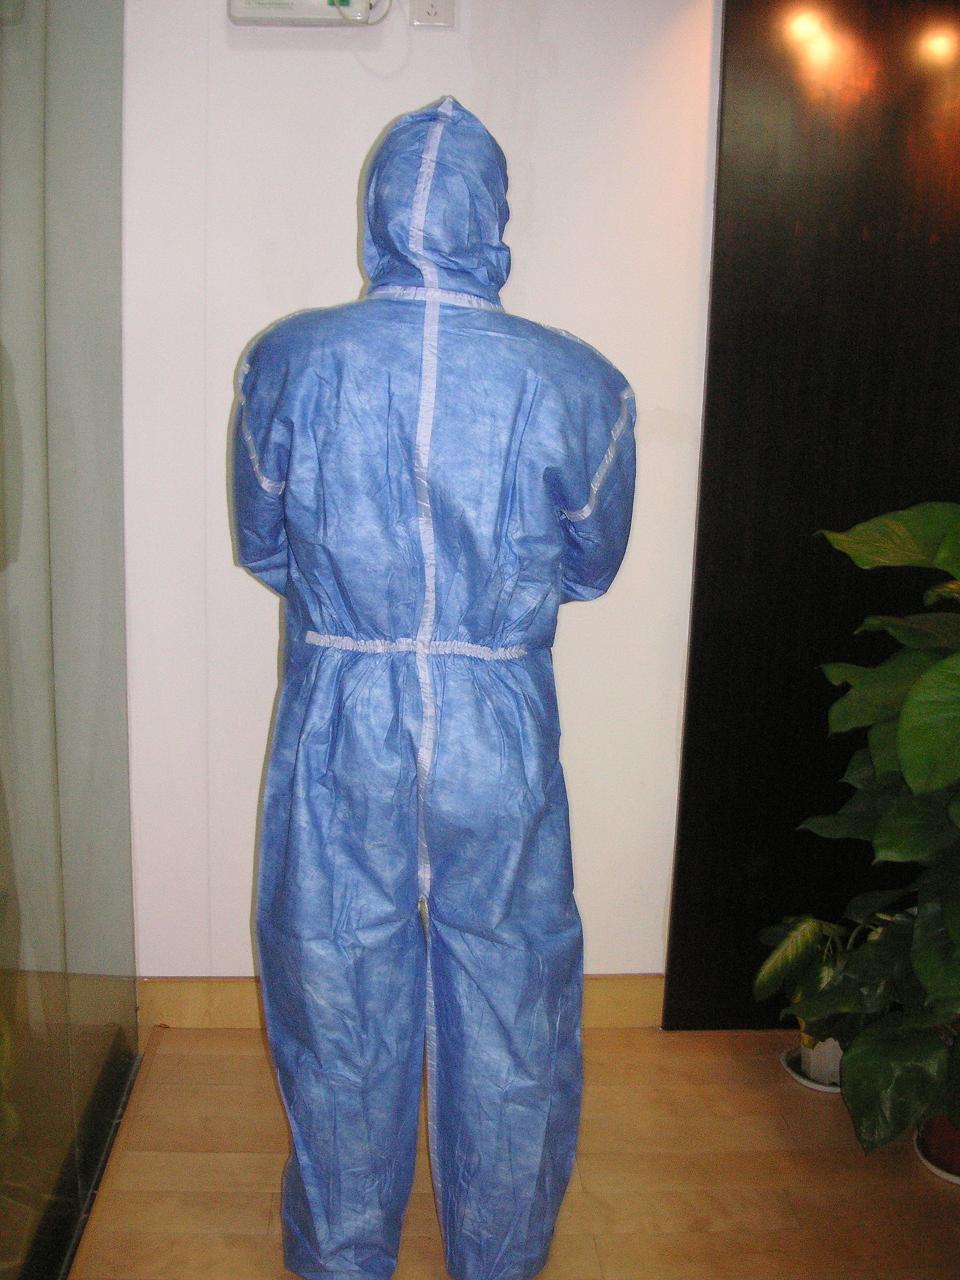 3 Ply (SFS) Coverall With Tape Seams (CV-07)